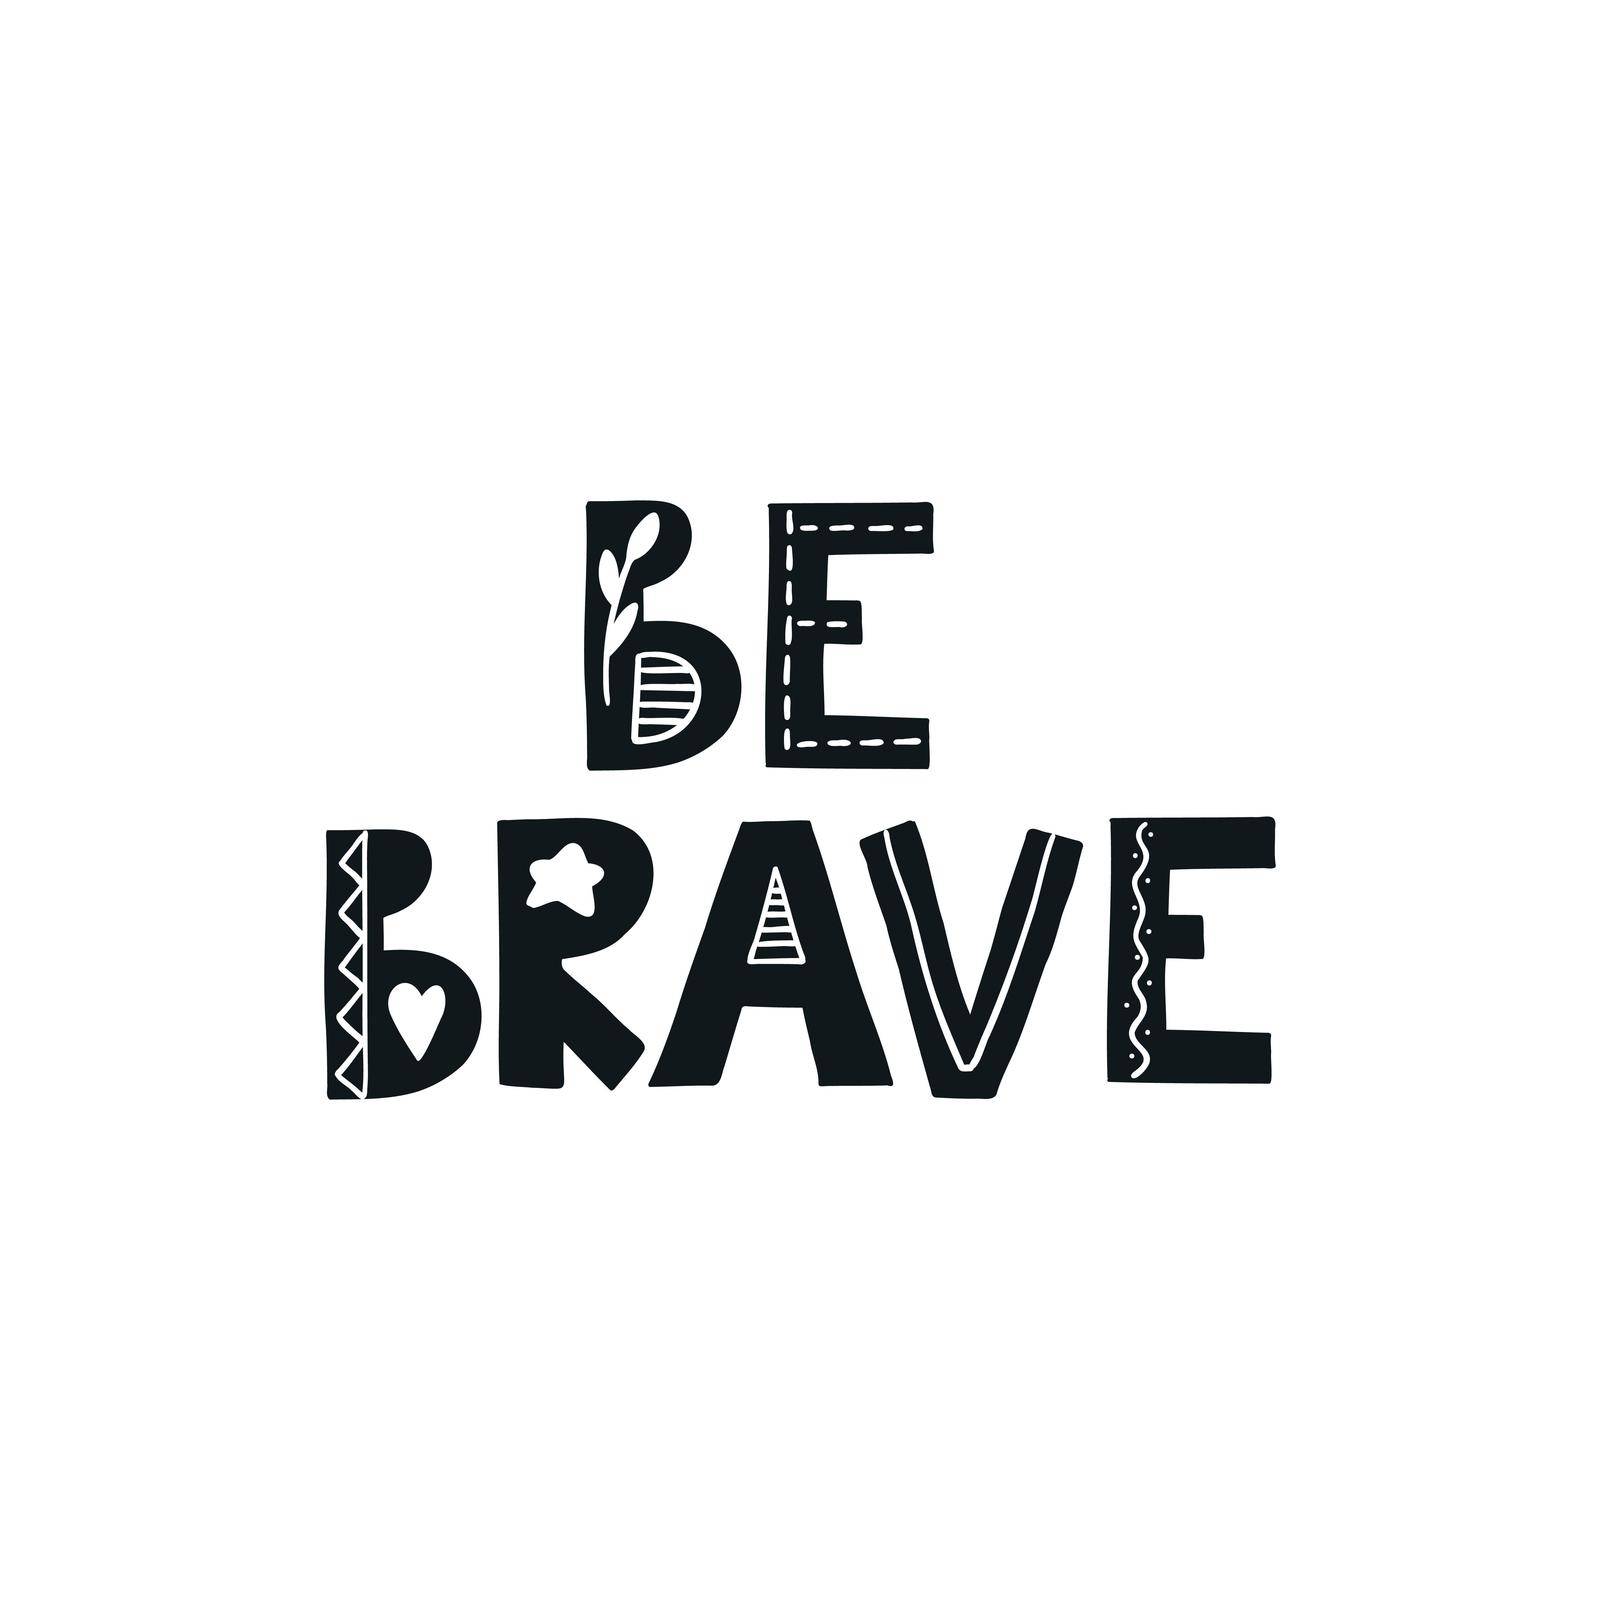 Be brave scandinavian quote. Positive nordic style phrase. Vector illustration for nursery room, kids print, poster, card.